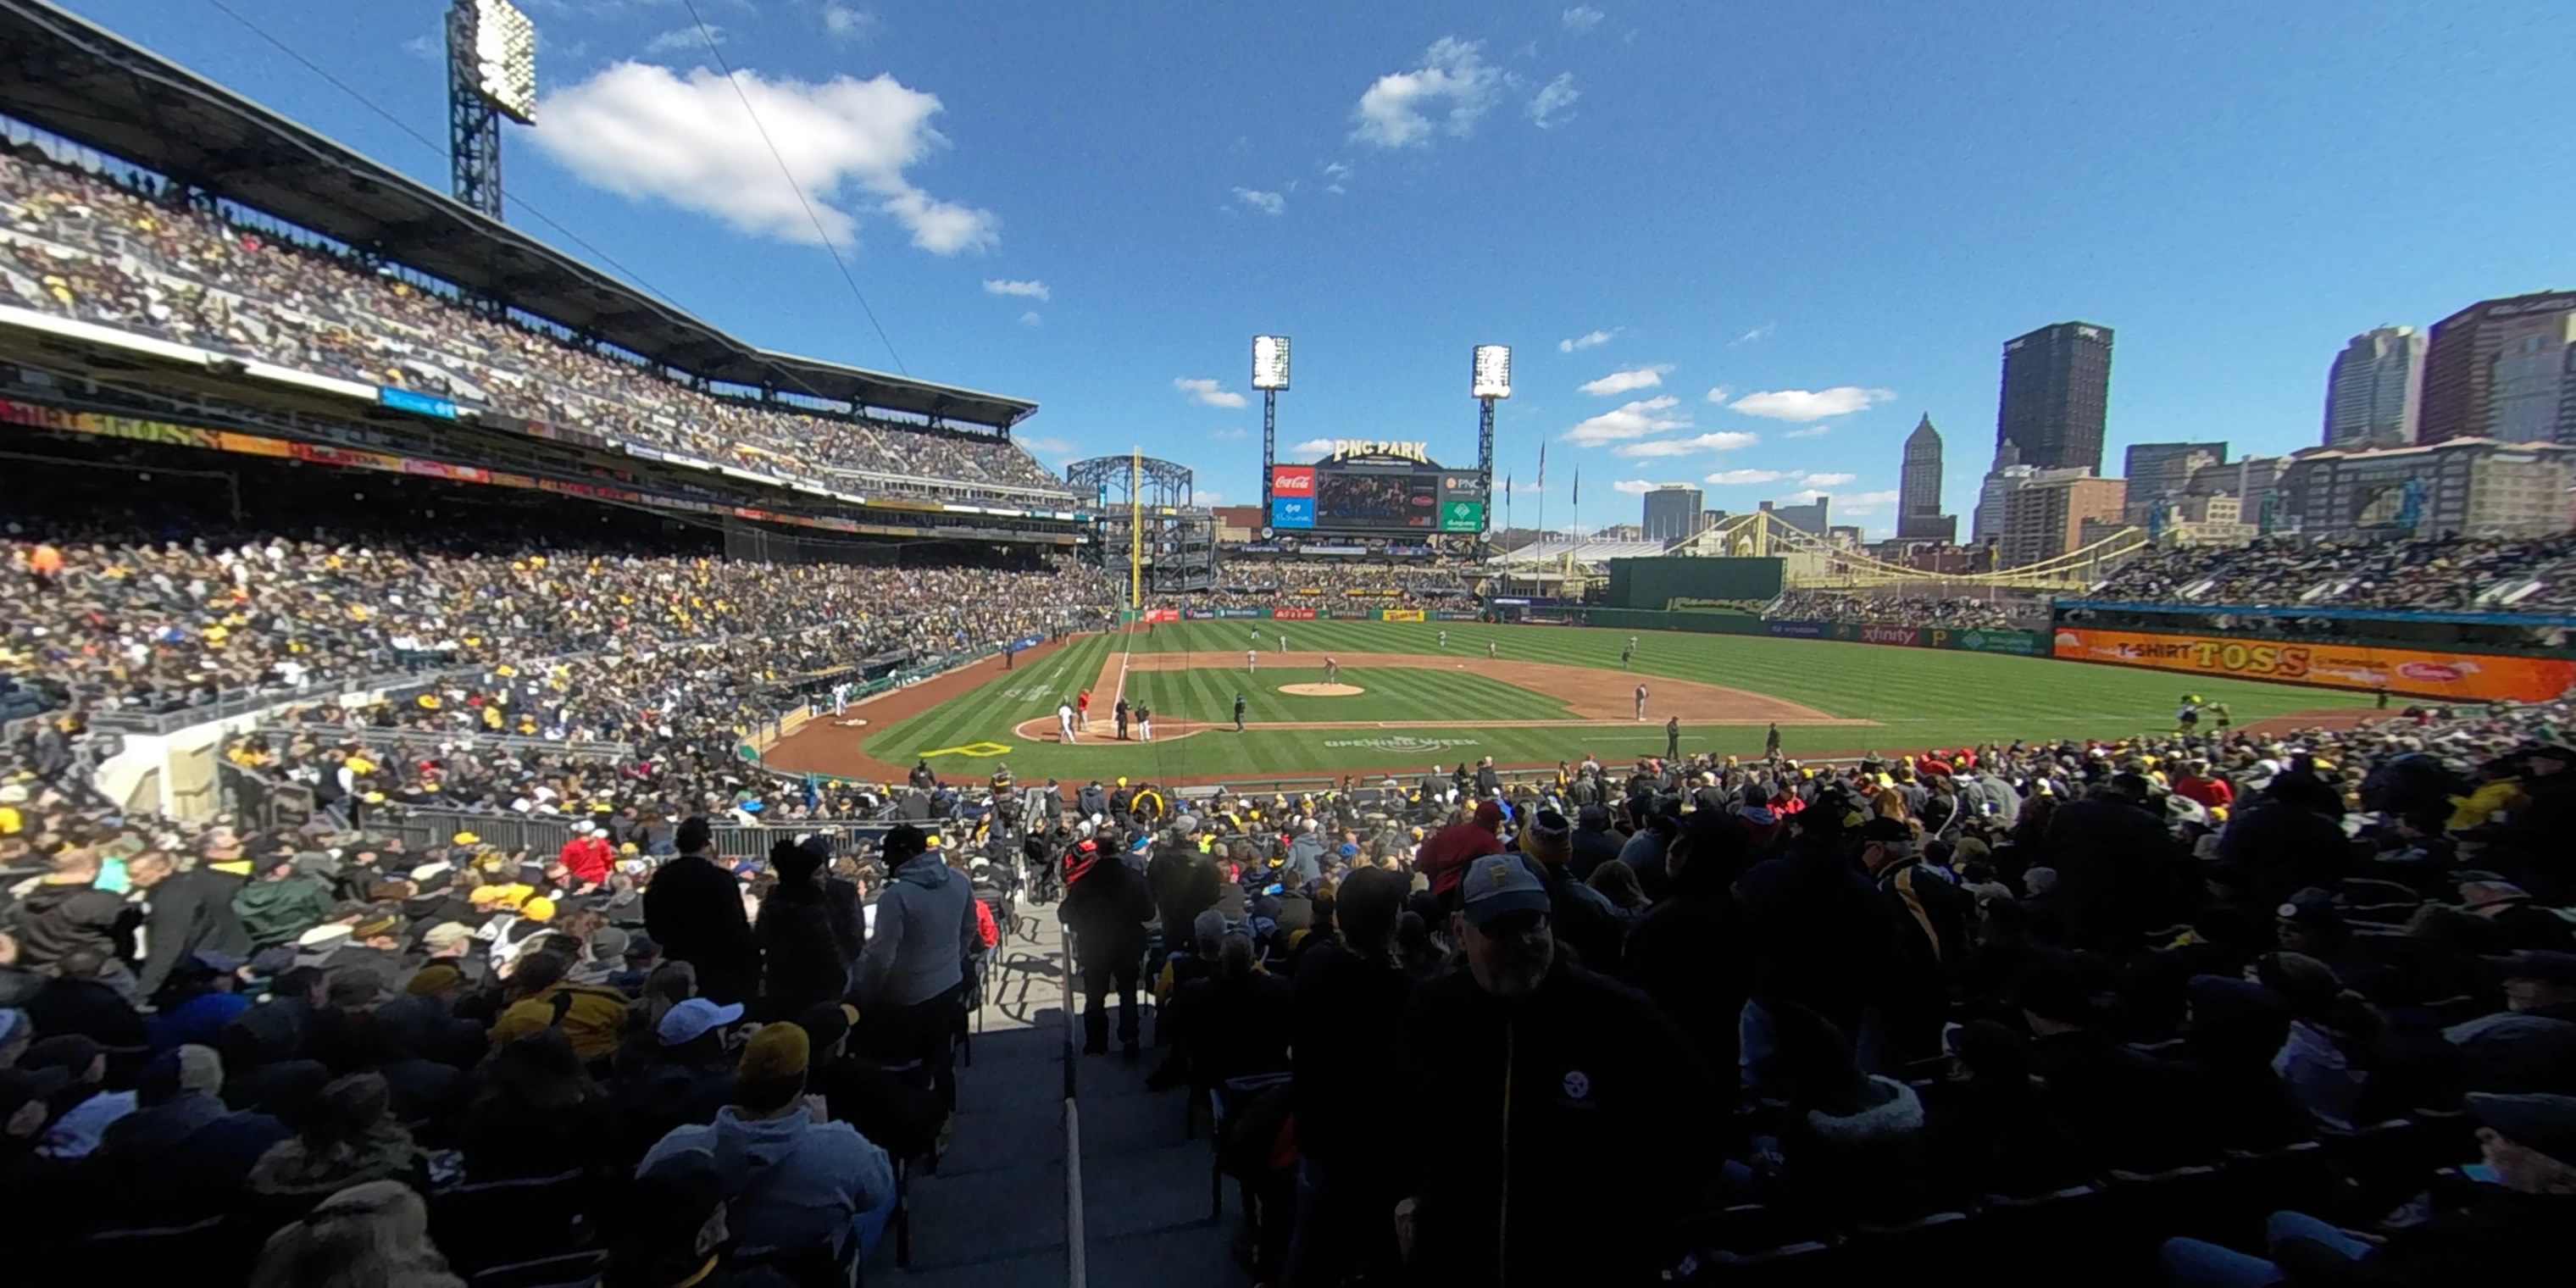 section 113 panoramic seat view  - pnc park